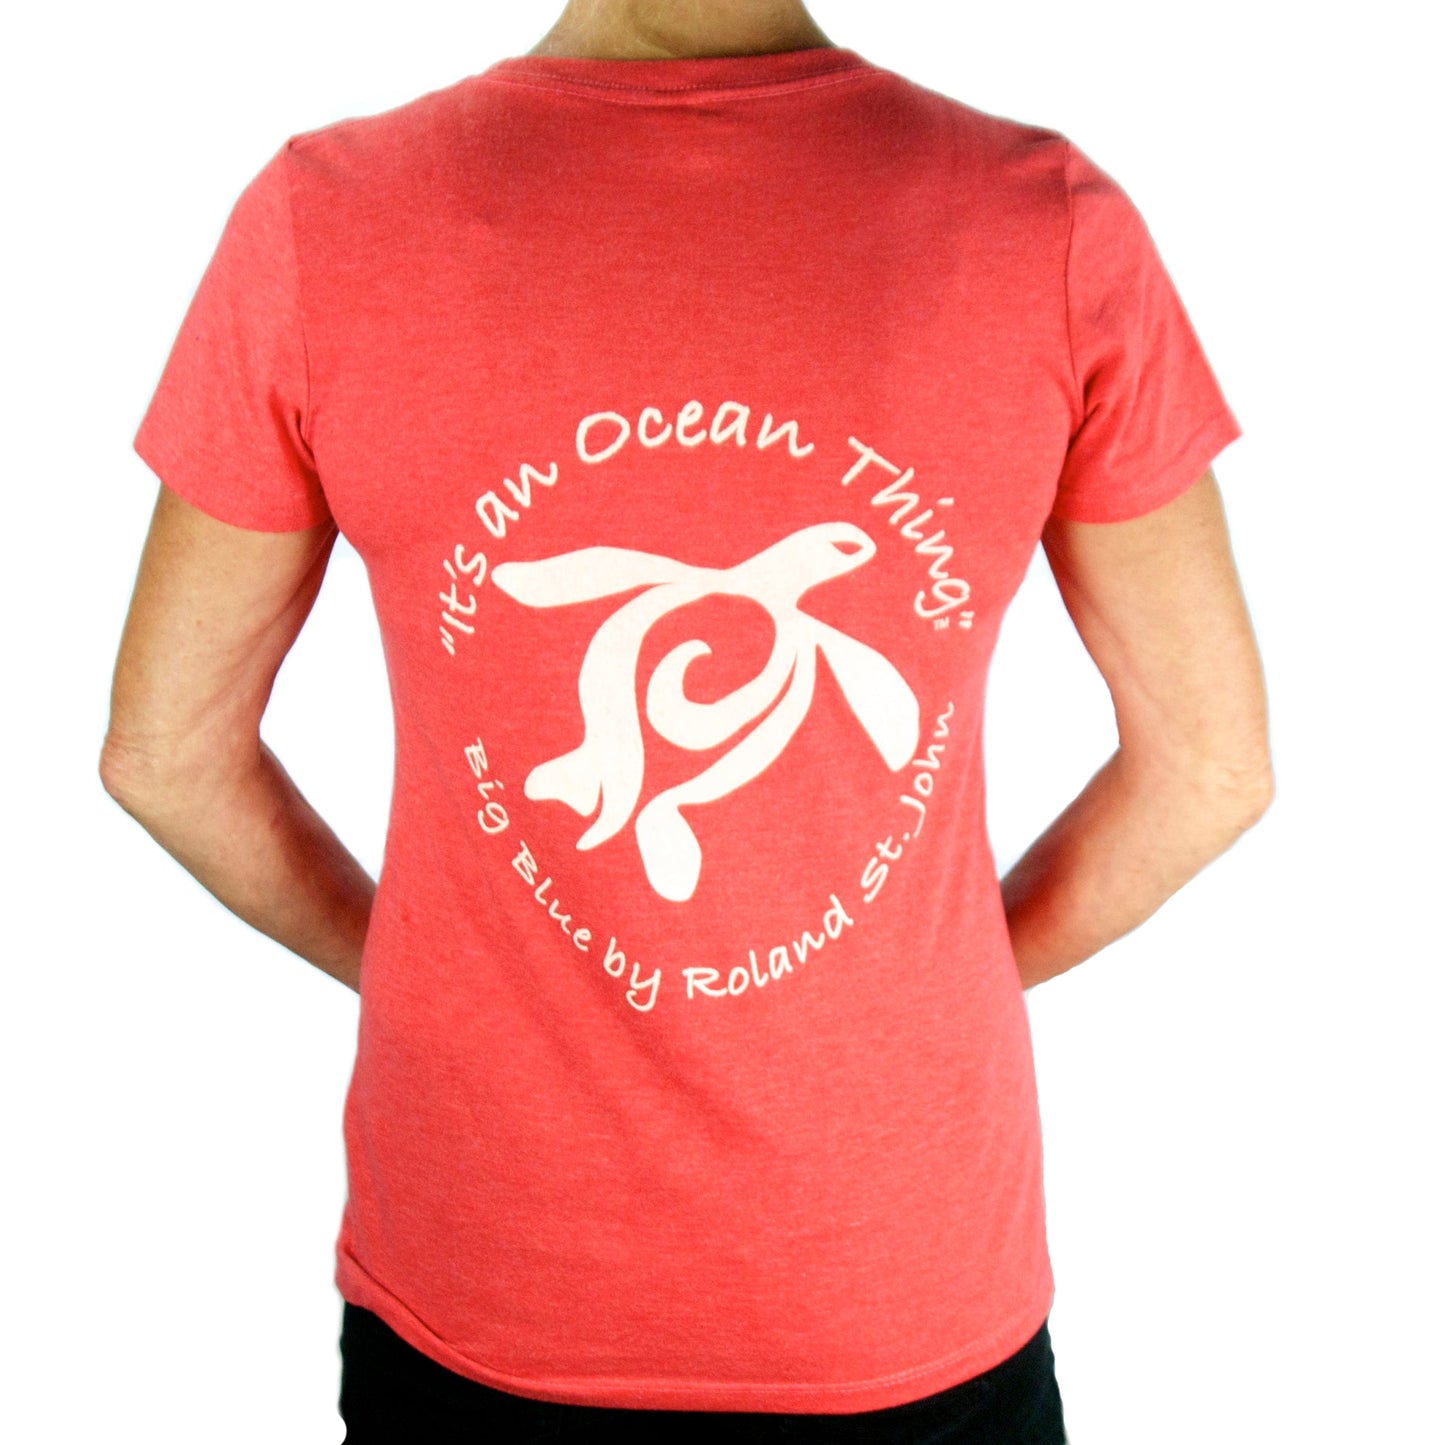 It's an Ocean Thing  Ocean Theme Sea Life Quality Woman's T-Shirt - The Tool Store